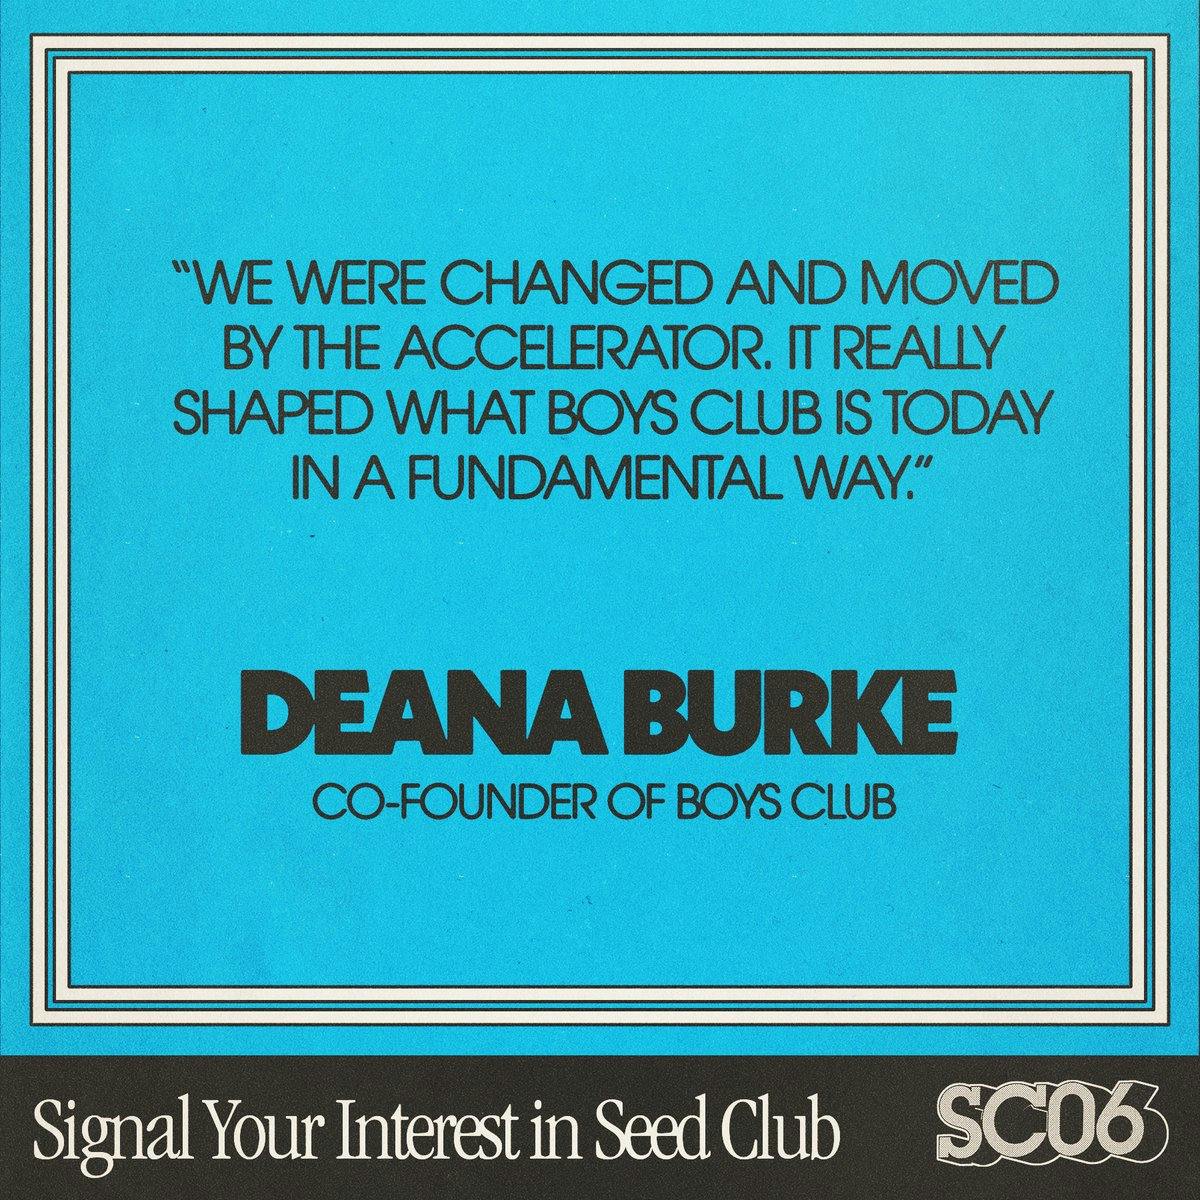 Listen to @medeana from #SC04 @BoysClubCrypto 👀👇

Sign up for our next accelerator's interest form: <a style='color: rgb(29,161,242); font-weight:normal; text-decoration: none' href='https://accelerator.seedclub.xyz' target='_blank'>accelerator.seedclub.xyz</a> 